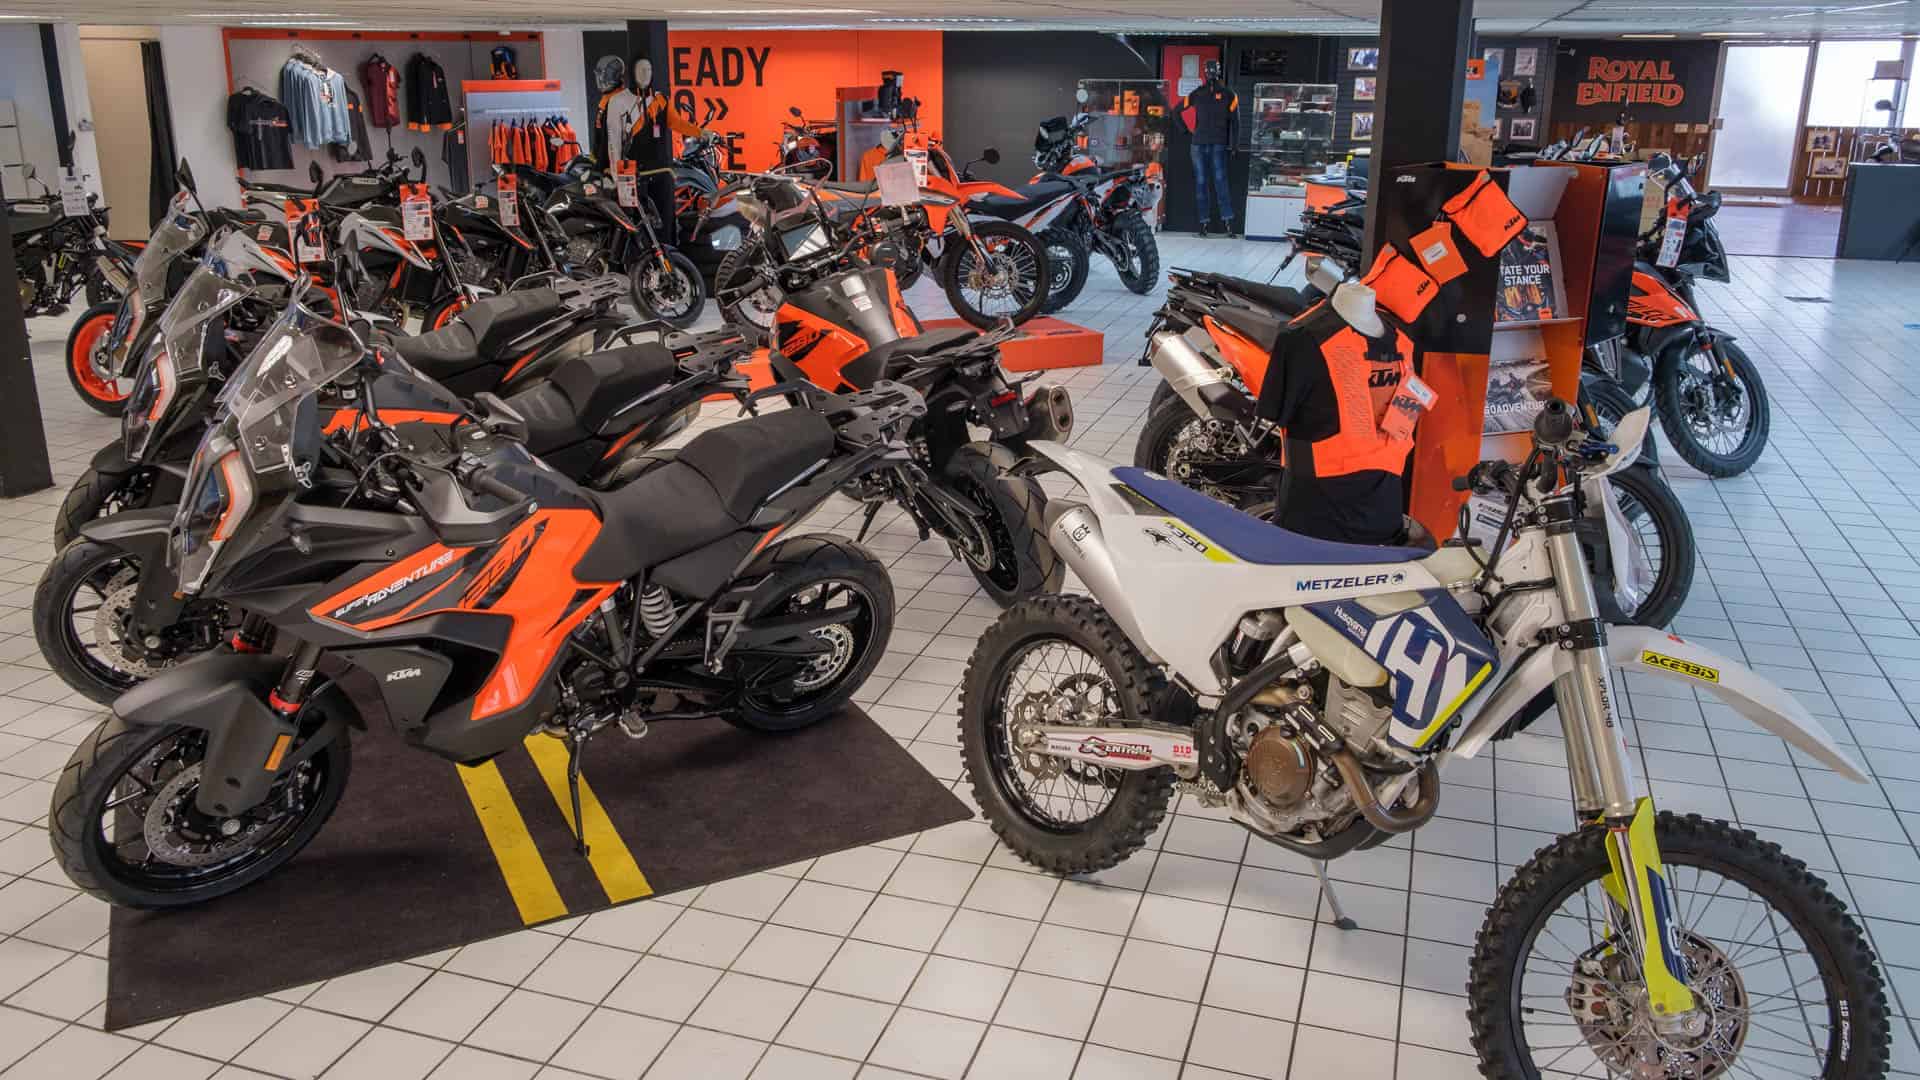 shop with motorcycles on display